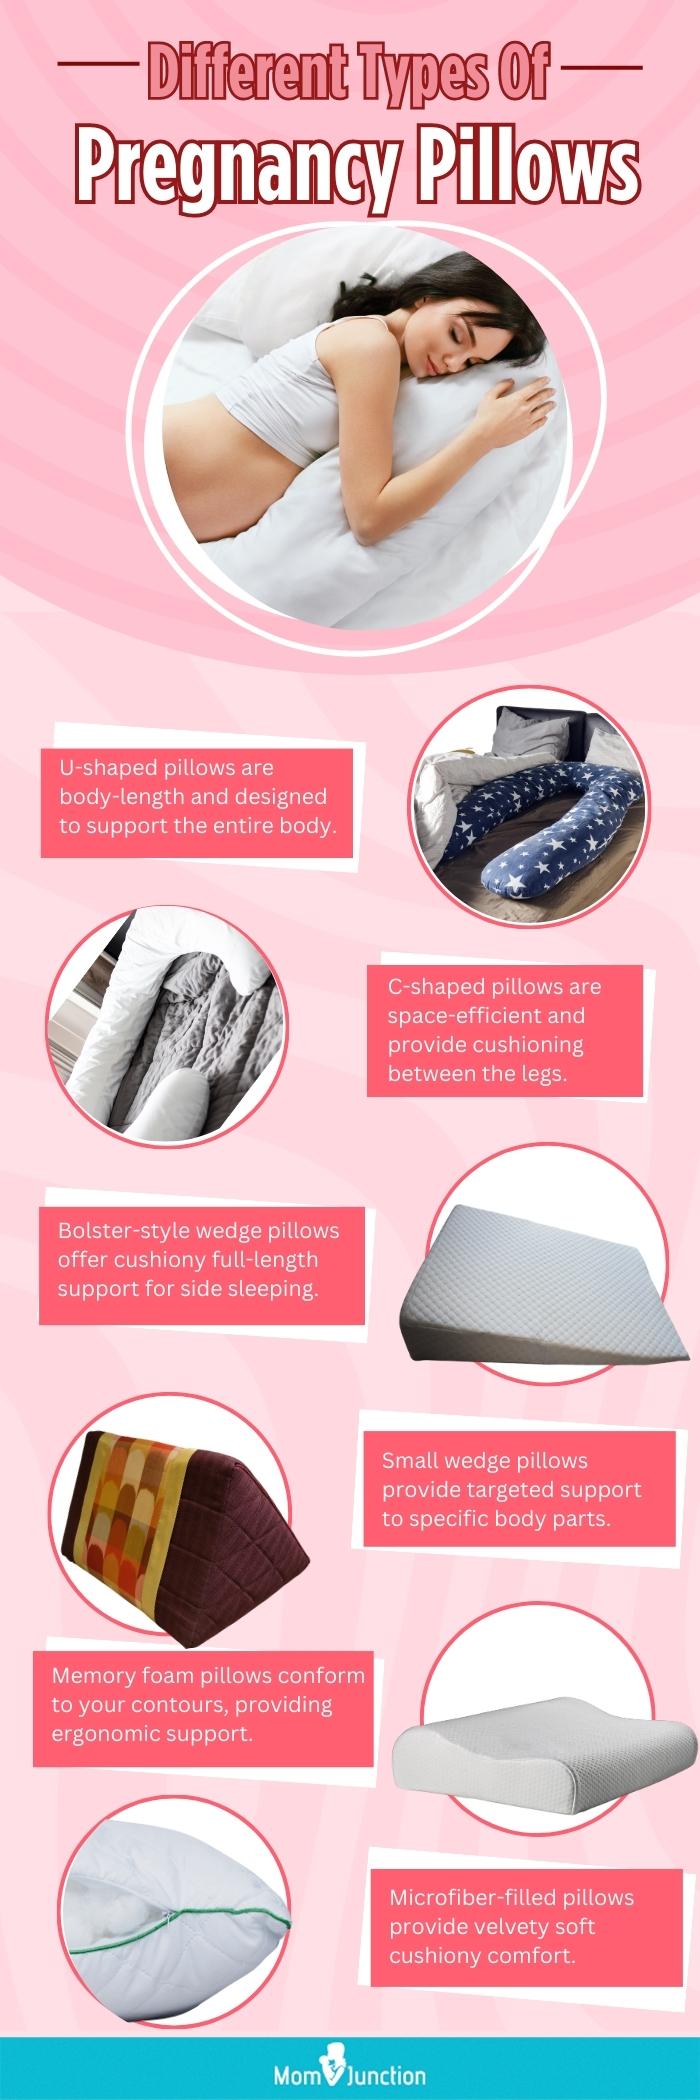 Different Types Of Pregnancy Pillows (infographic)